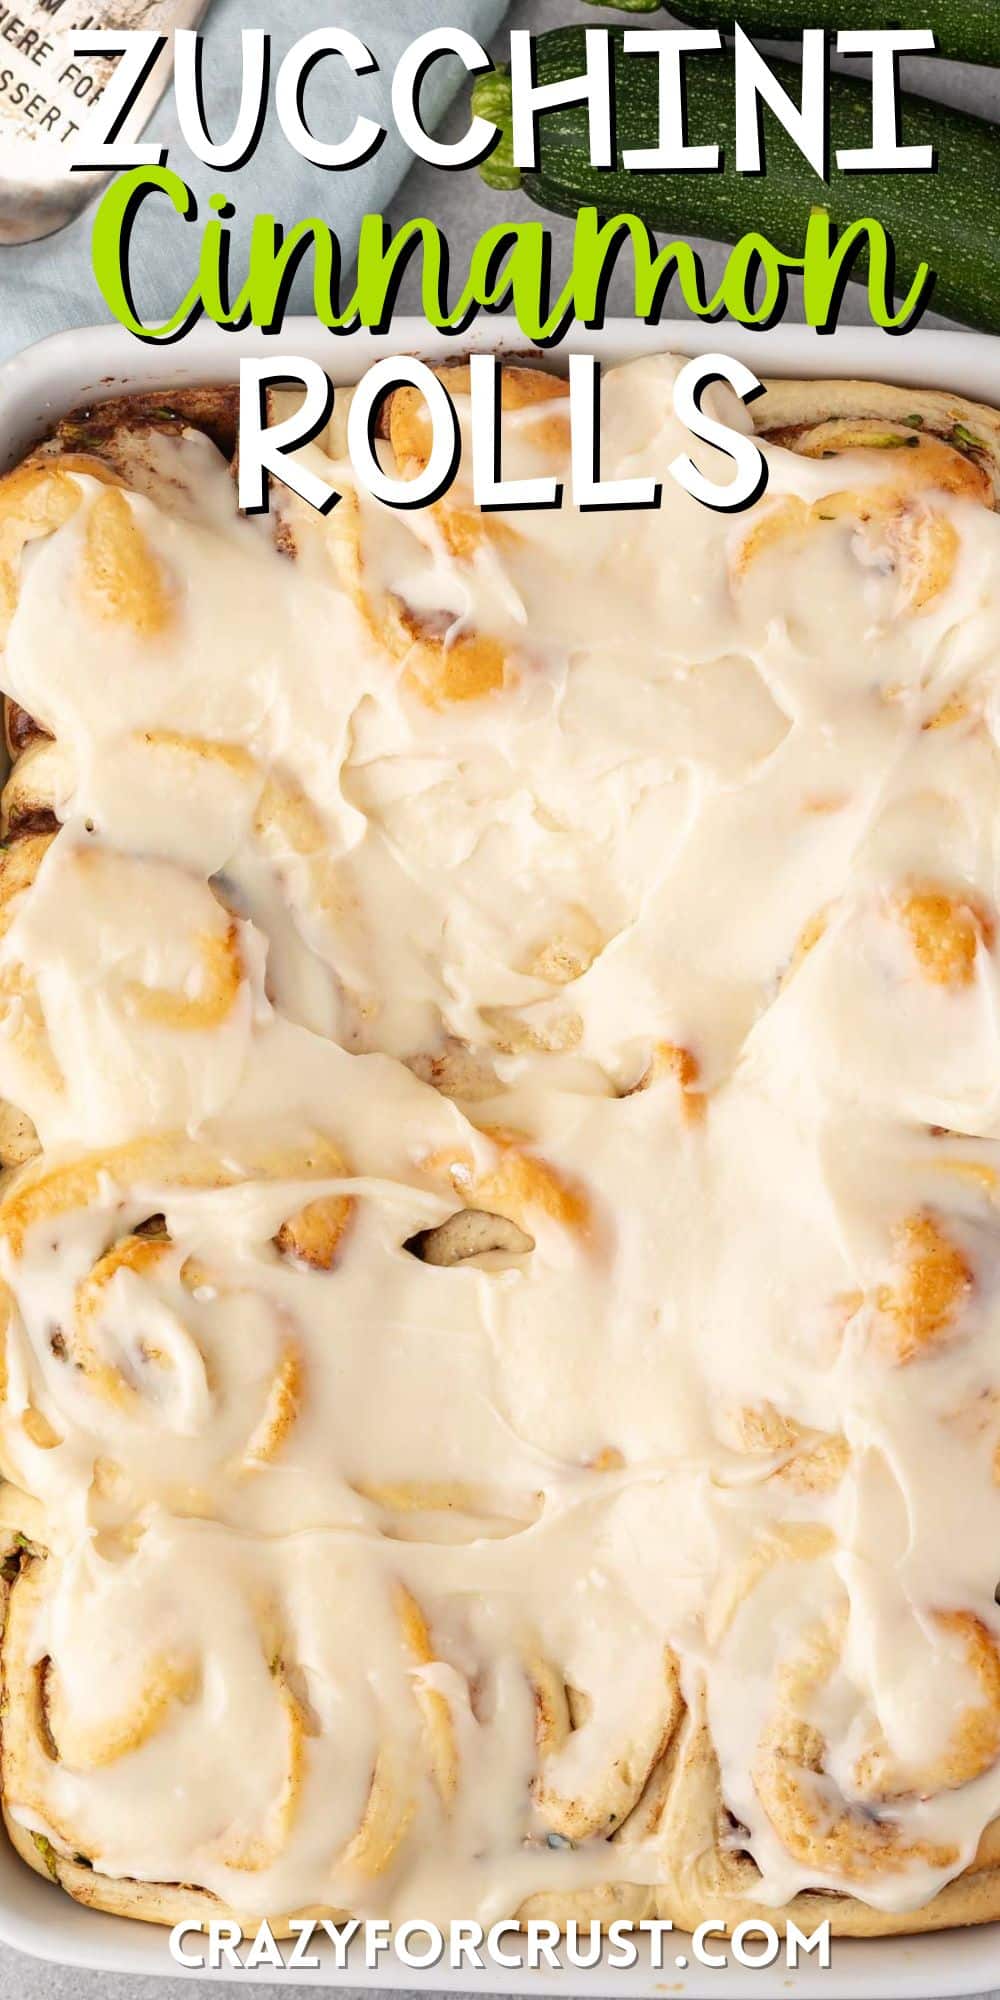 zucchini cinnamon rolls in a white pan covered in frosting with words on the image.